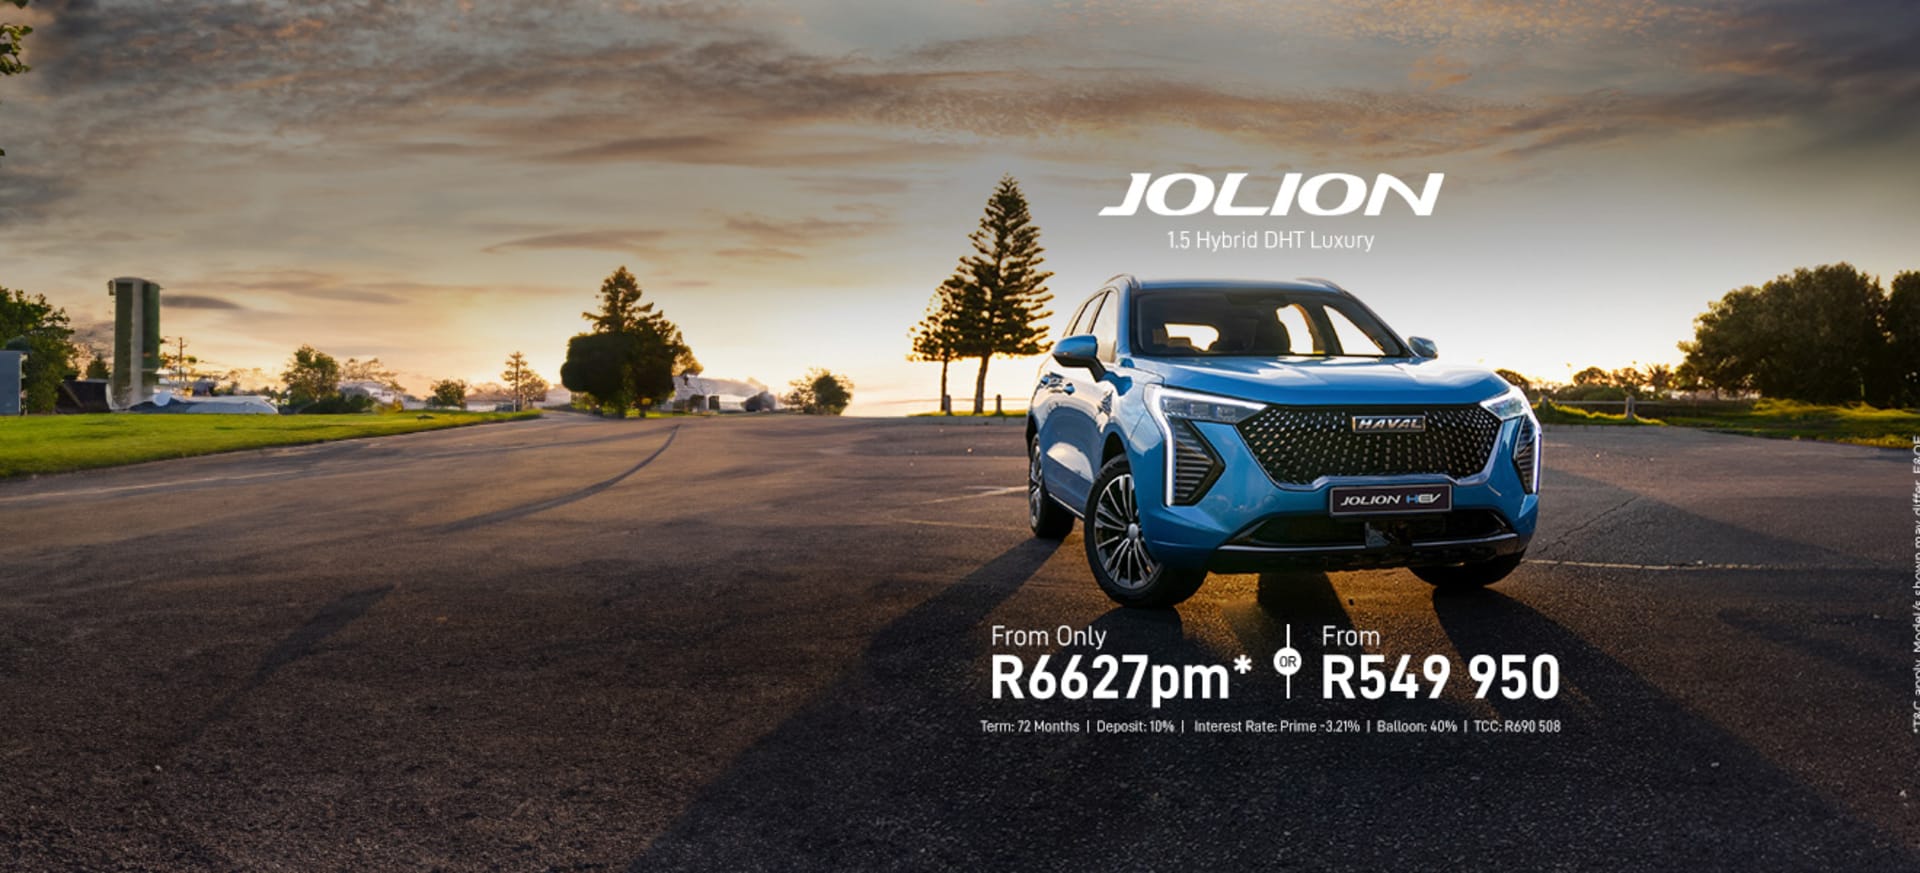 Haval Jolion 1.5L Hybrid Lux From R6 627pm*